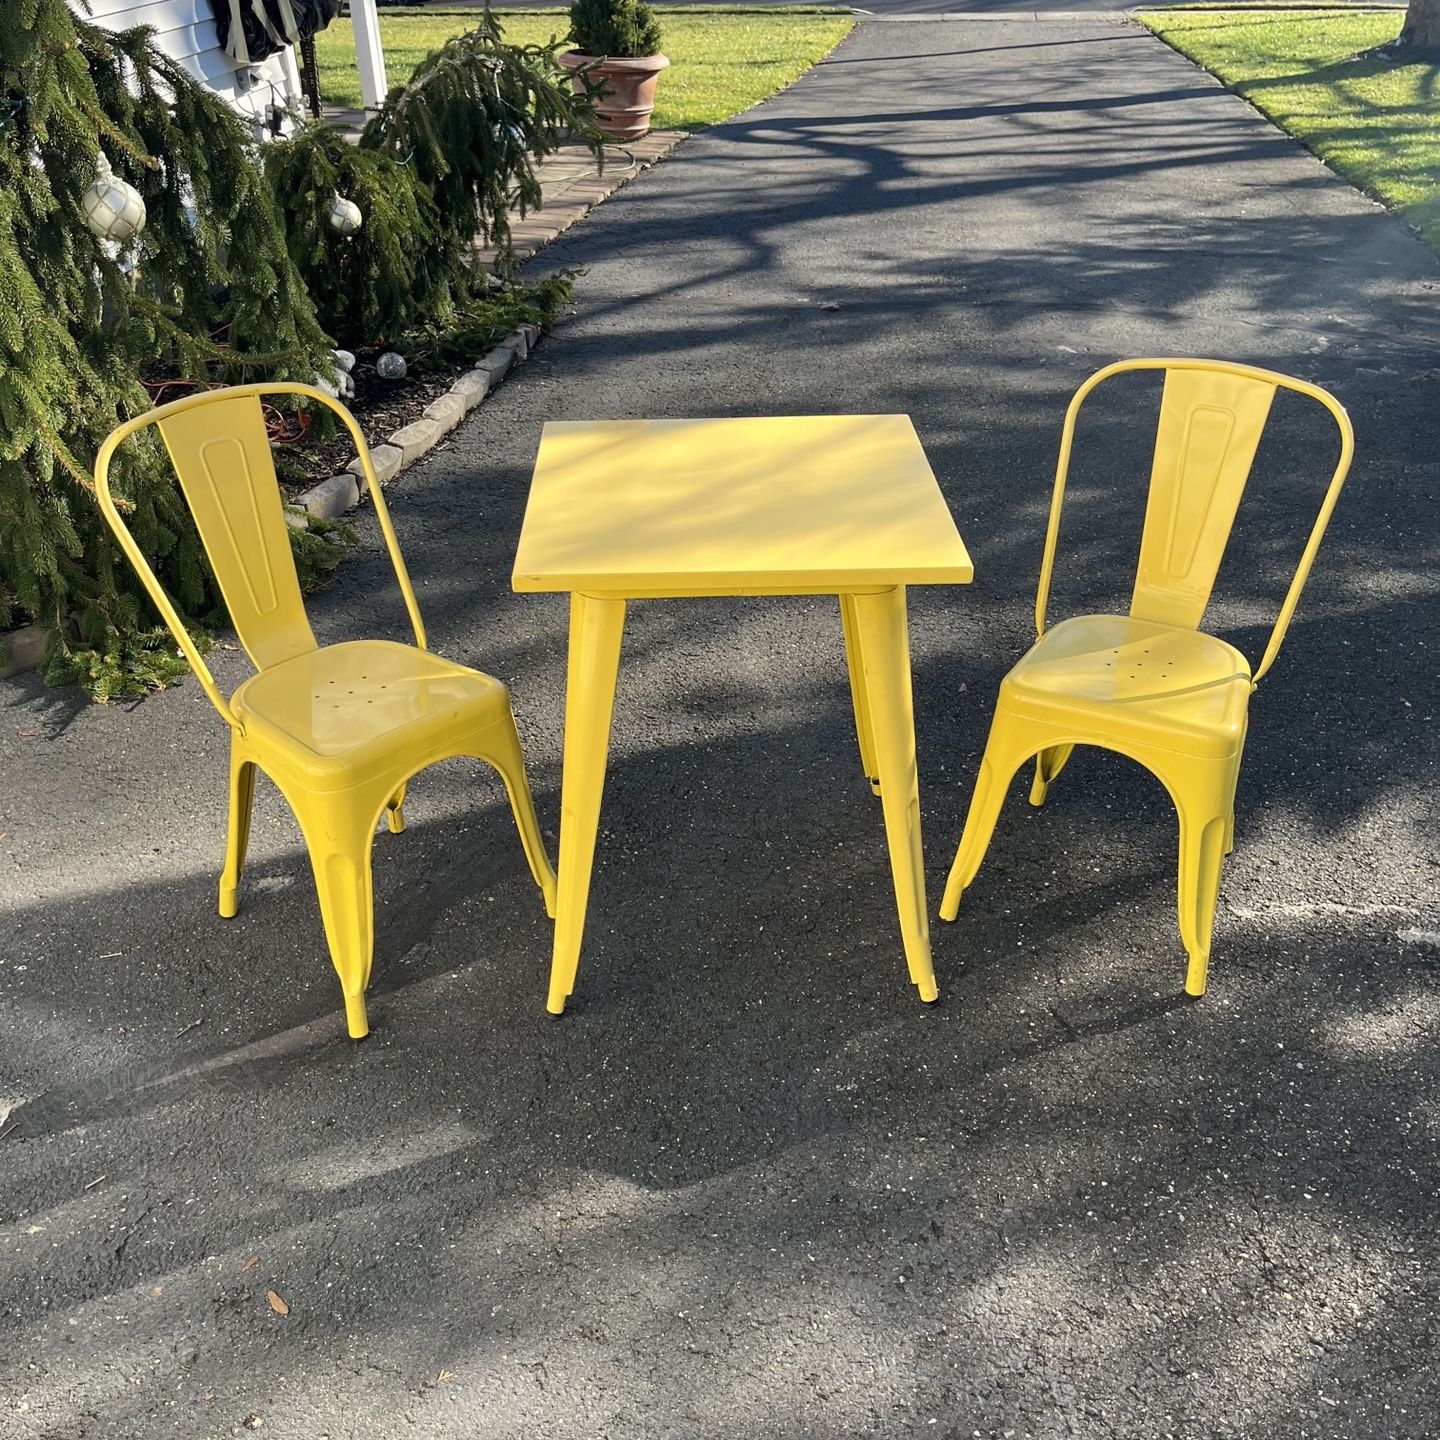 Outdoor Table And 2 Chairs set